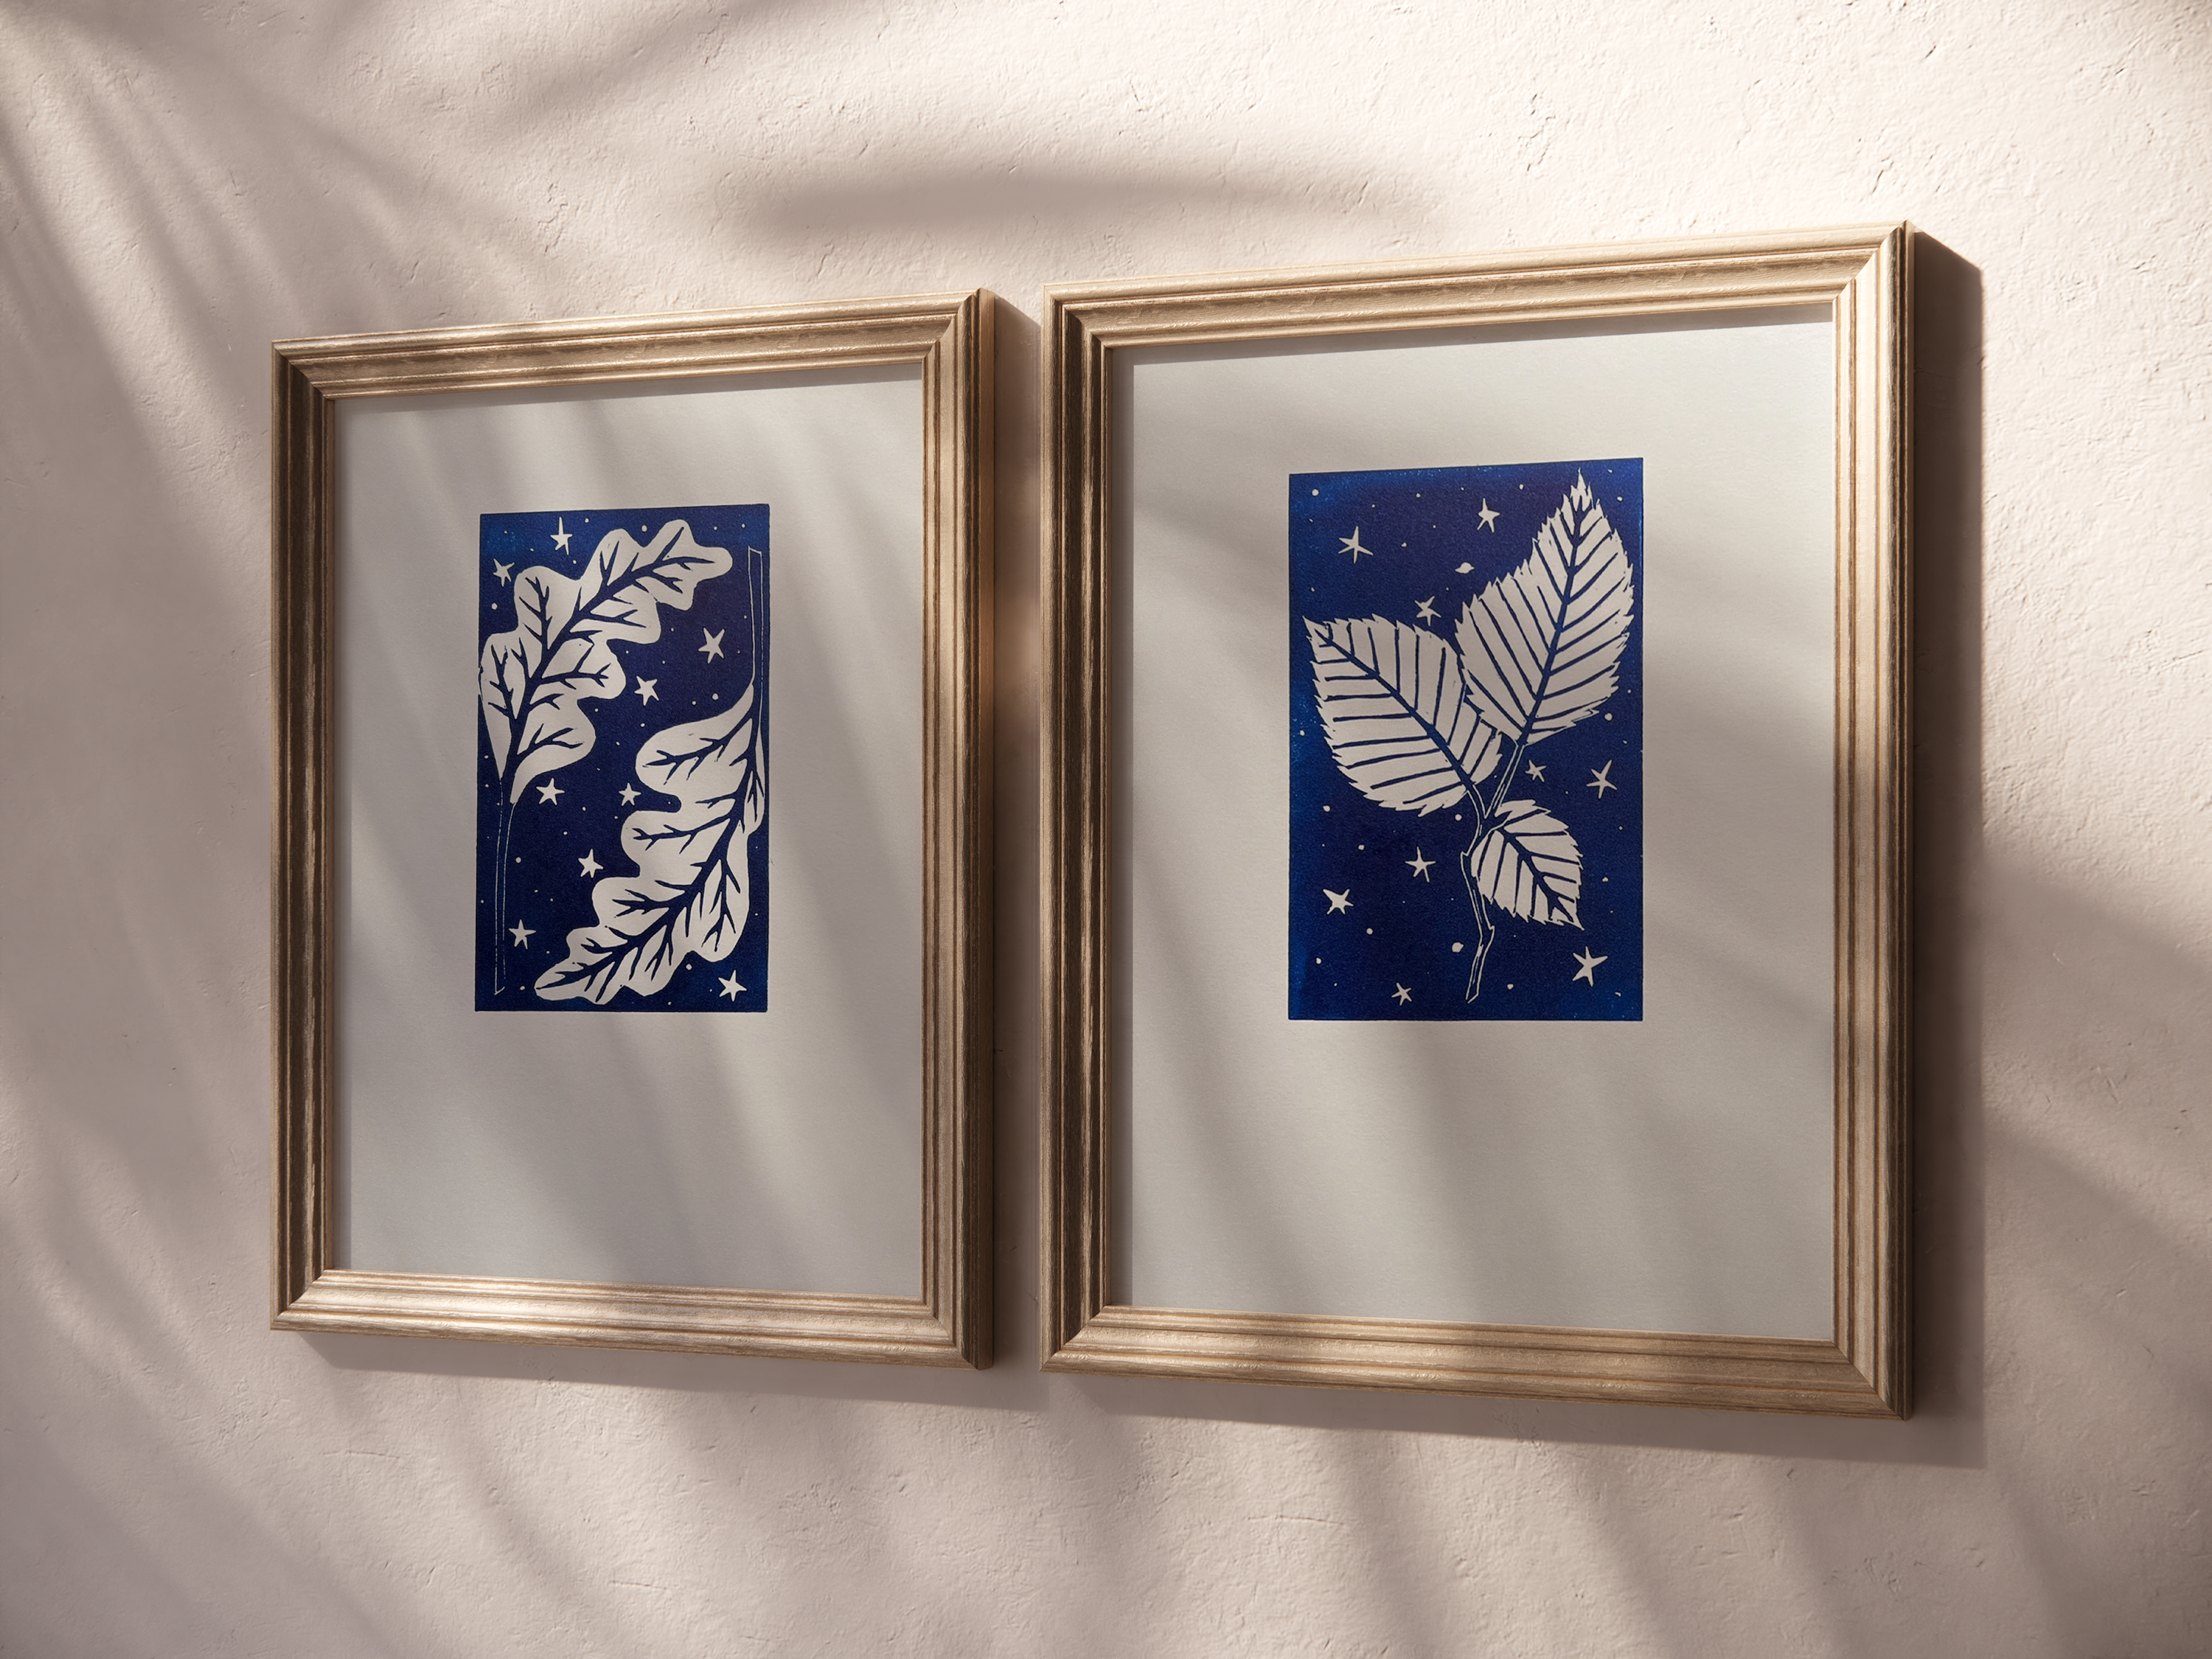 A mockup of two of the prints framed in oak frames on a shadow filled wall